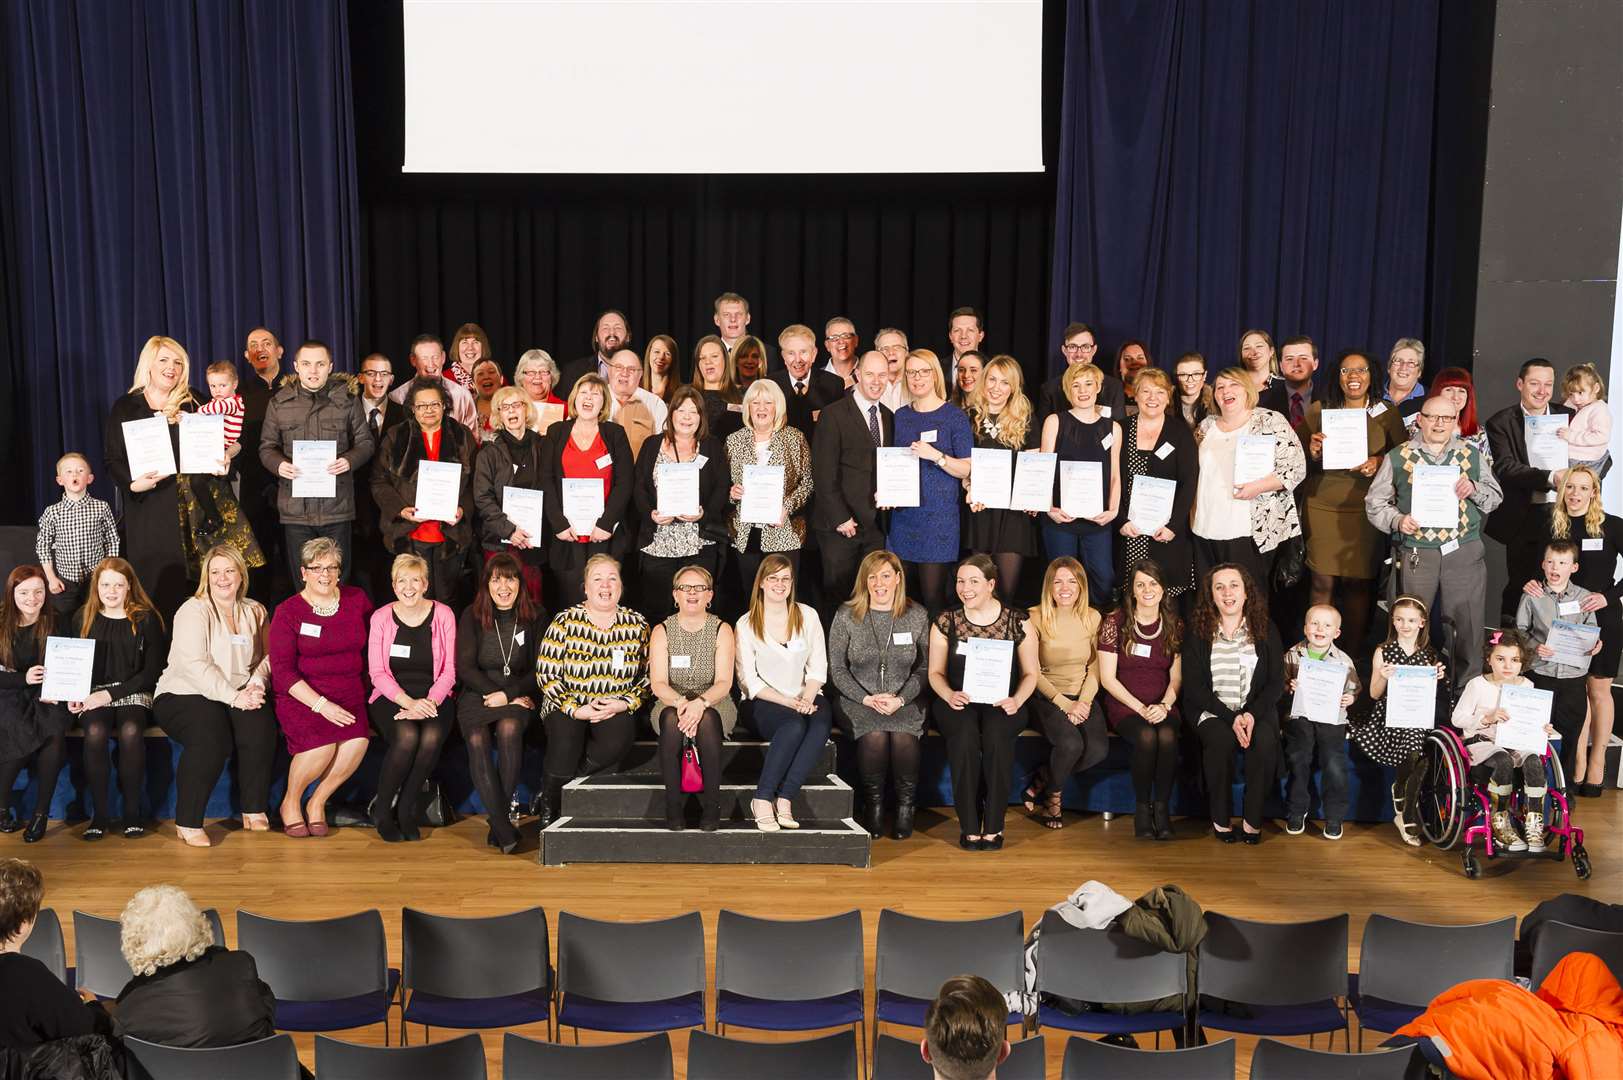 More than 70 nominations were received for this year's Pride in Medway awards